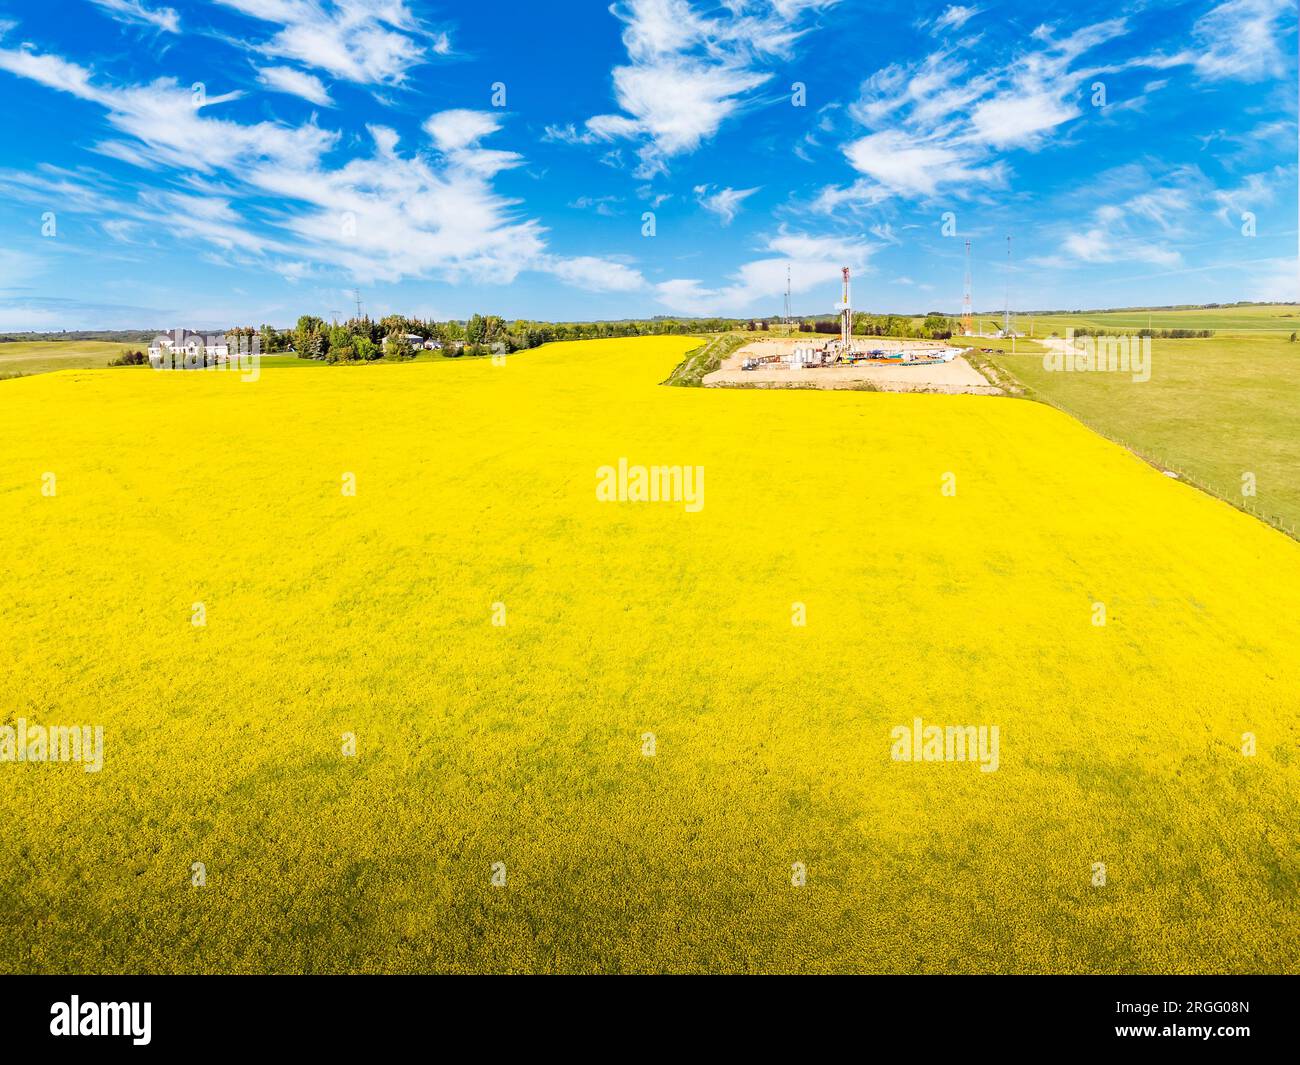 Aerial blooming canola field overlooking an oil and gas drilling rig next to a rural property near the Calgary city limits in Rocky County Alberta Can Stock Photo